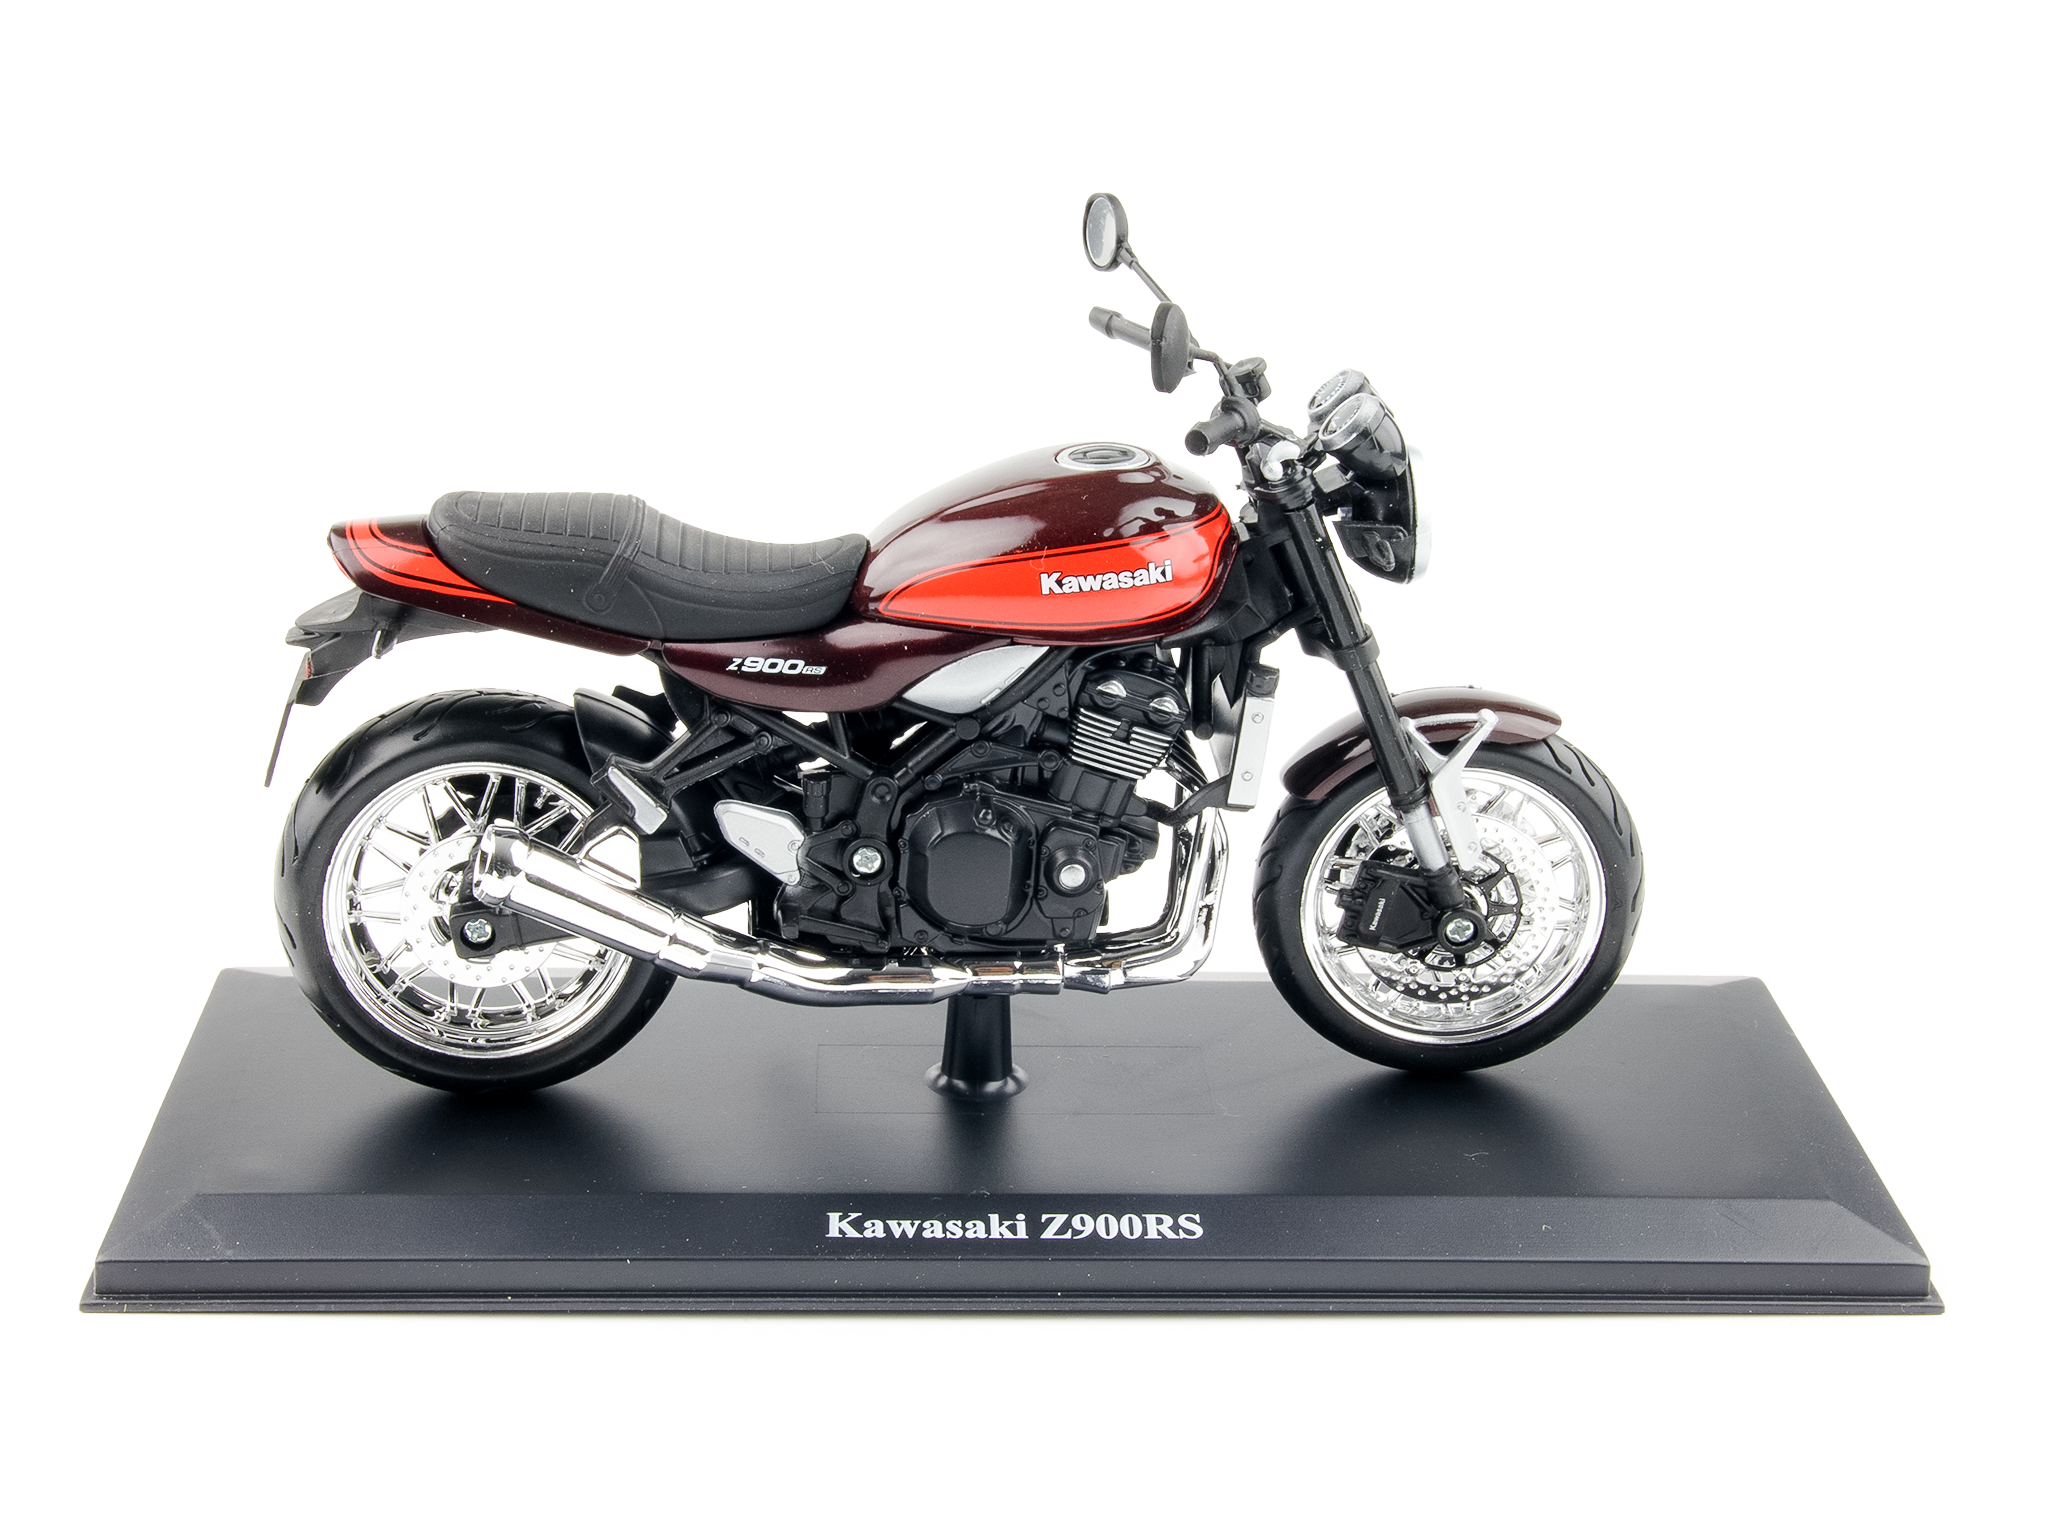 Kawasaki Z900RS 2019 Candytone Brown/Candytone Orange - 1:12 Scale Diecast Model Motorcycle